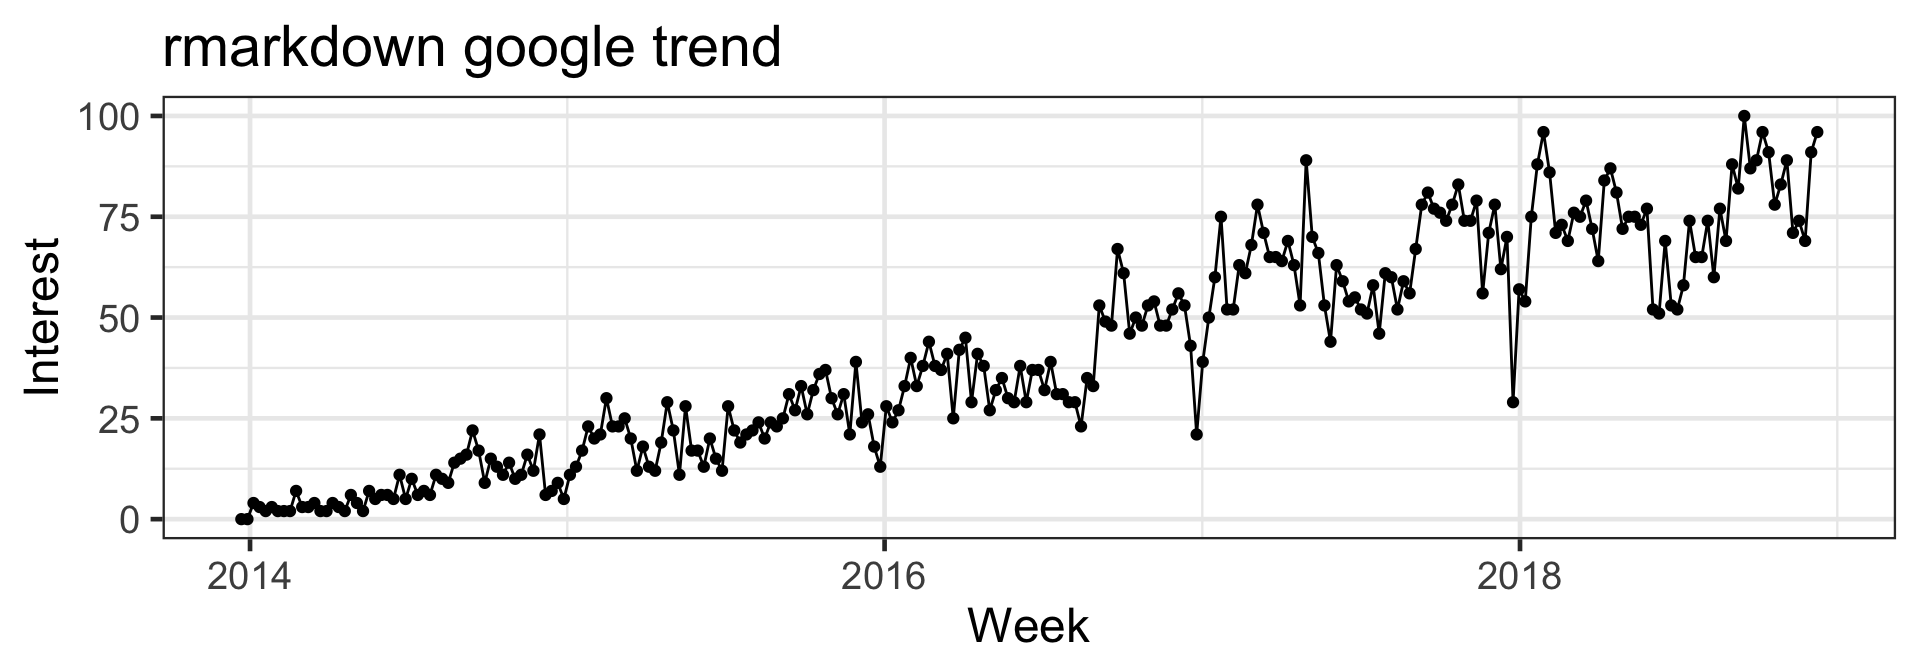 The data is taken for a 5 year period 2013-12-22 to 2018-12-16 from google trends on search for term "rmarkdown". Interest represent worldwide search interest relative to the highest point on the chart over the 5 year period. A value of 100 is the peak popularity for the term. A value of 50 means that the term is half as popular. A score of 0 means there was not enough data for this term. The upward trend in the graph implies that R Markdown is gaining popularity.